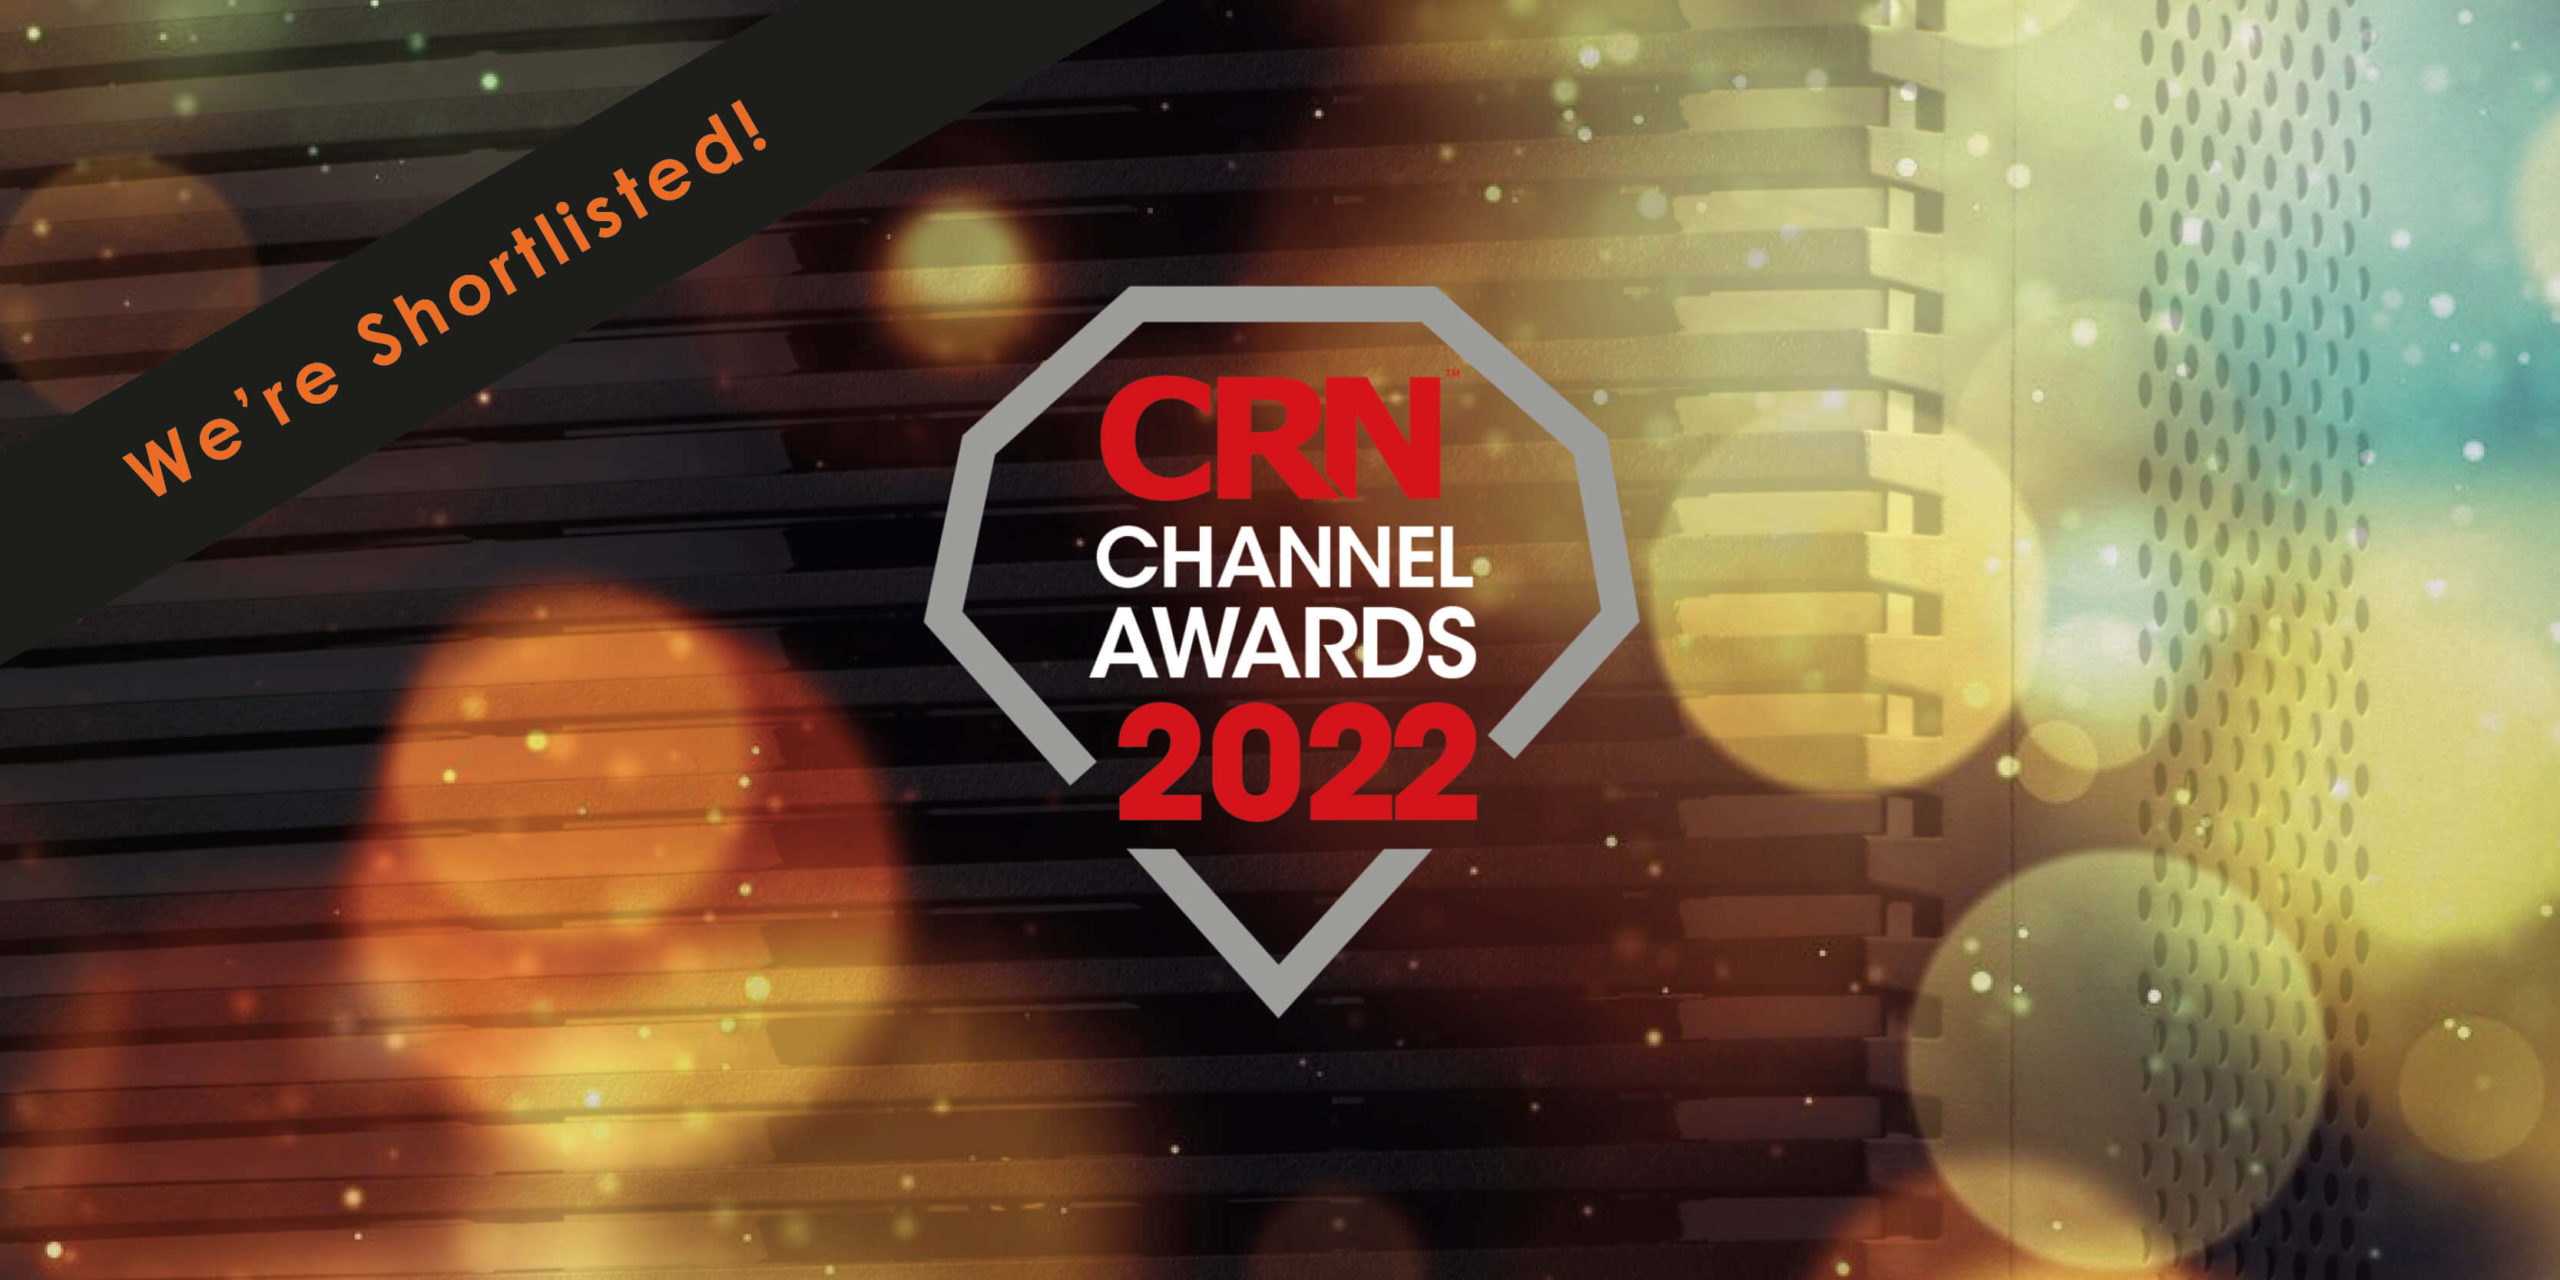 CRN channel awards 2022 shortlisted